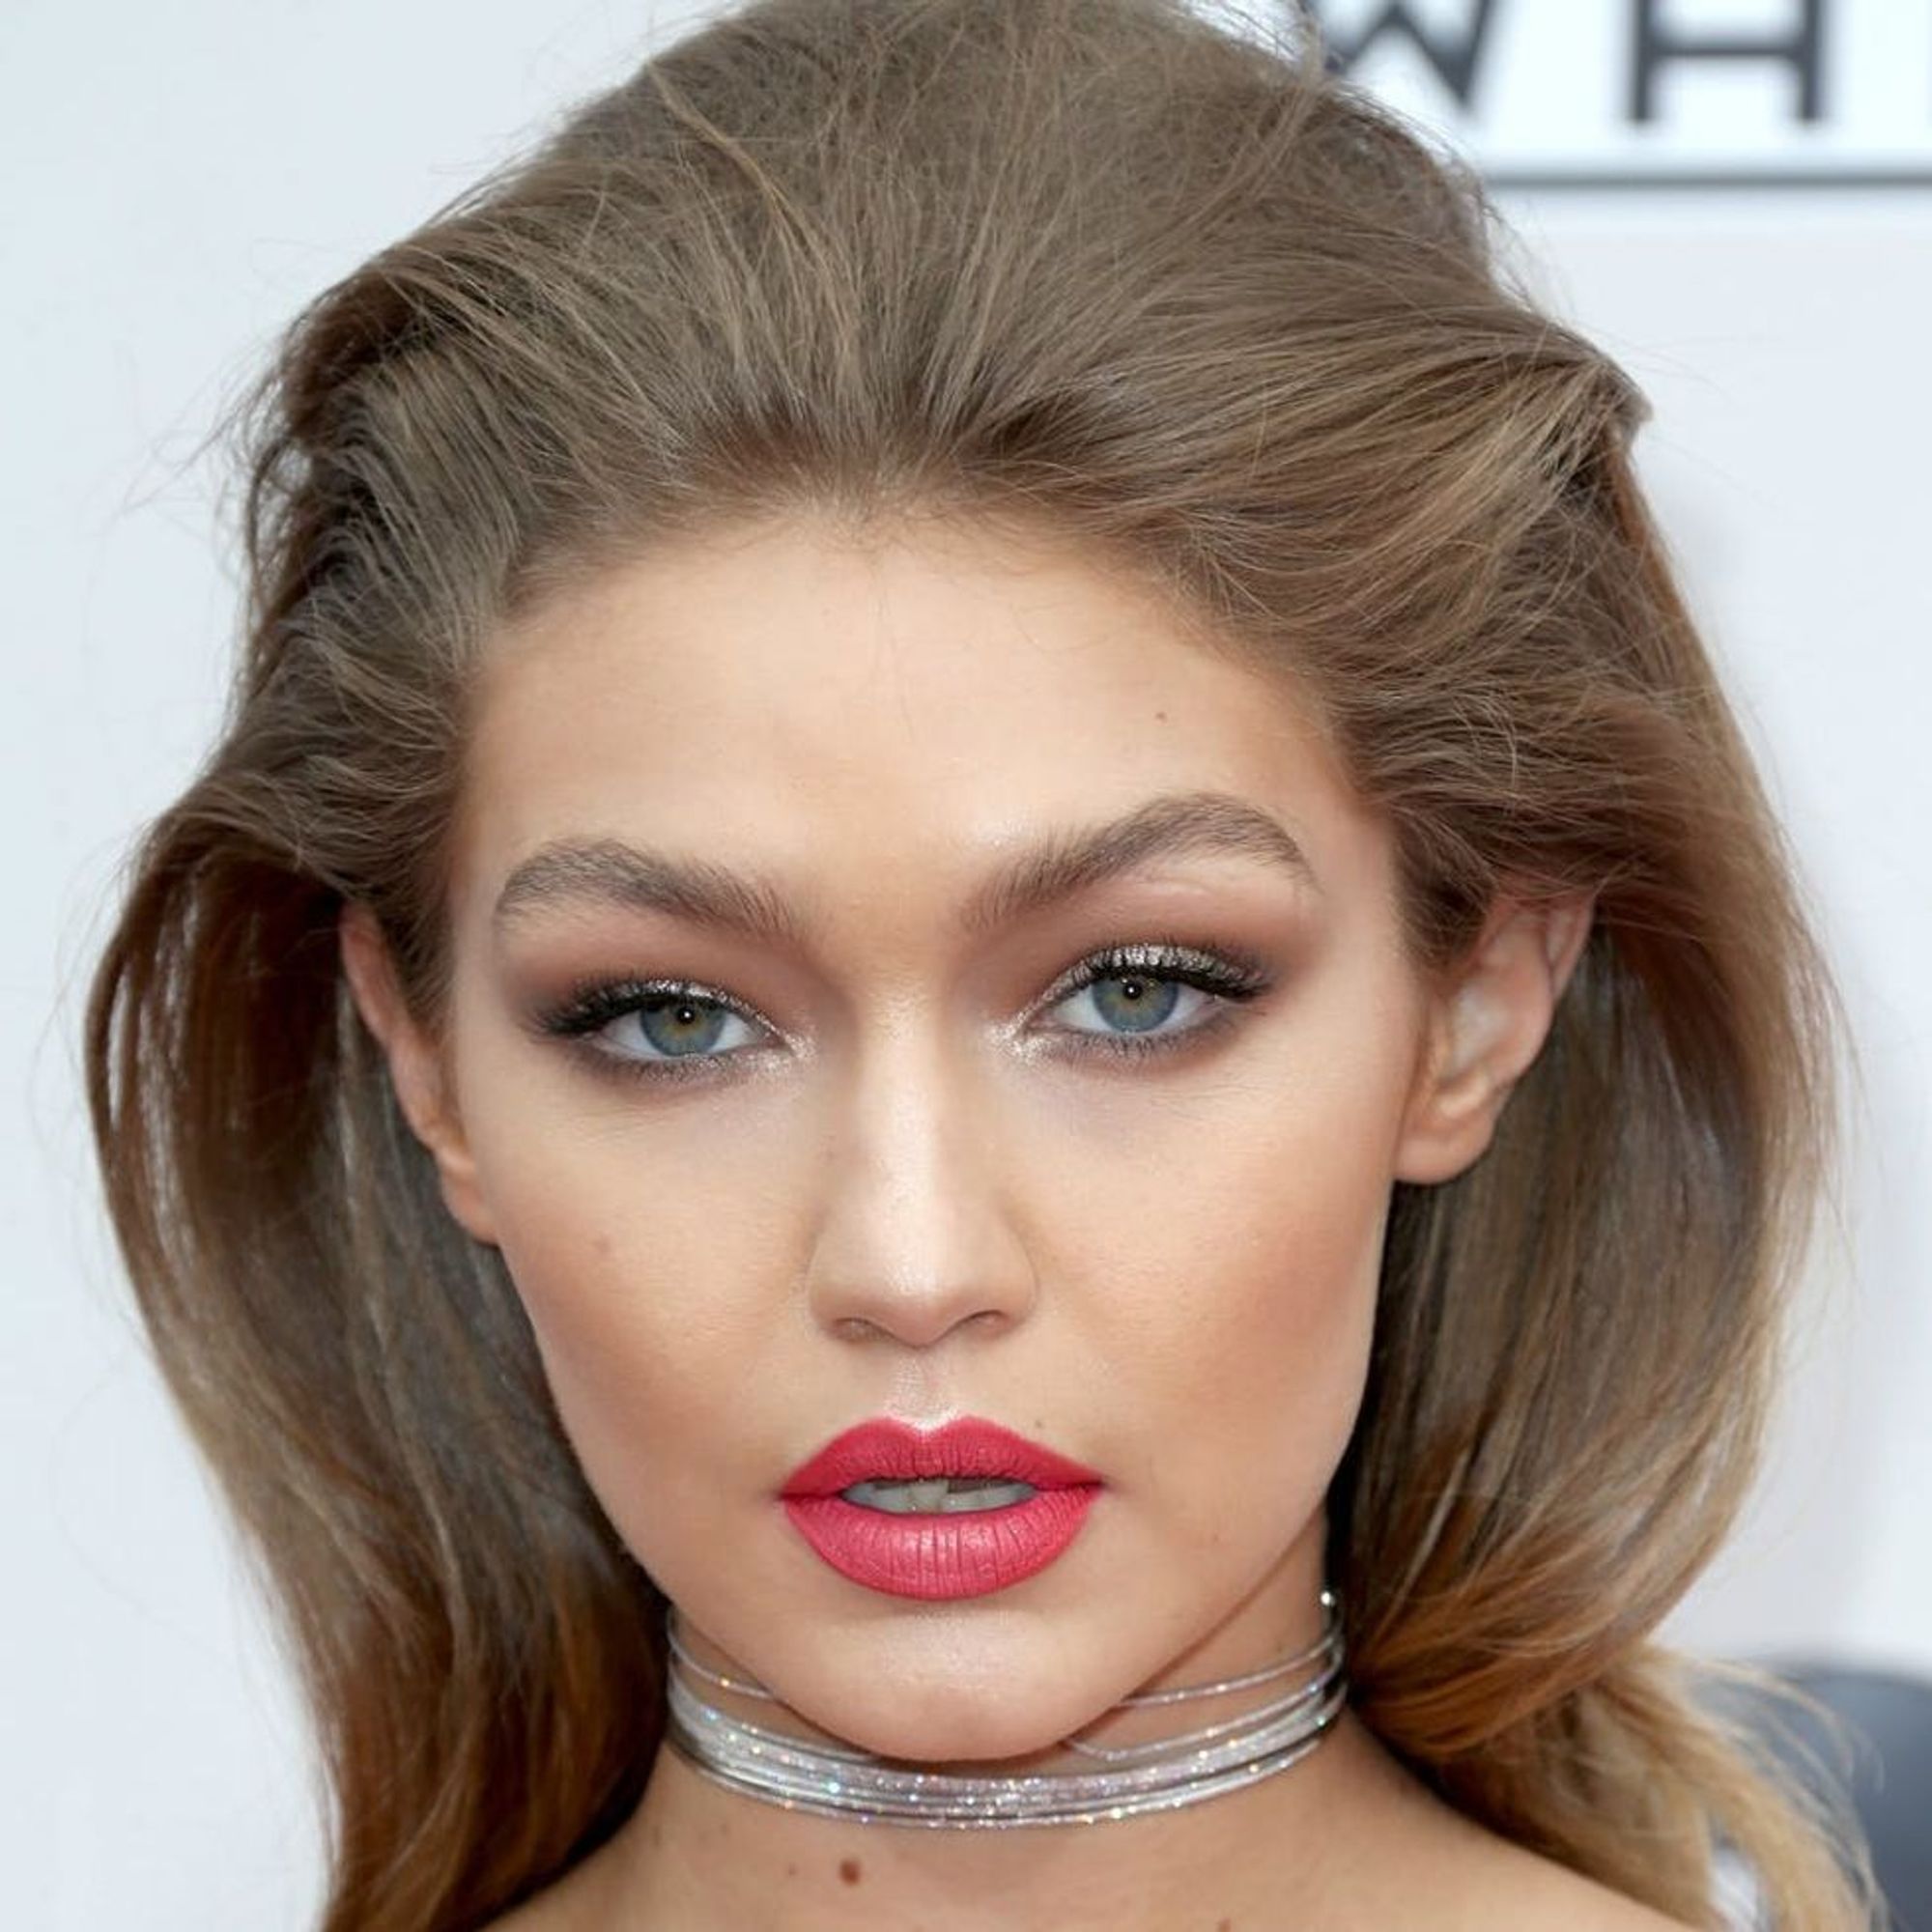 Gigi Hadid Just Made Pink Ombre Hair Look Totally Wearable - Brit + Co